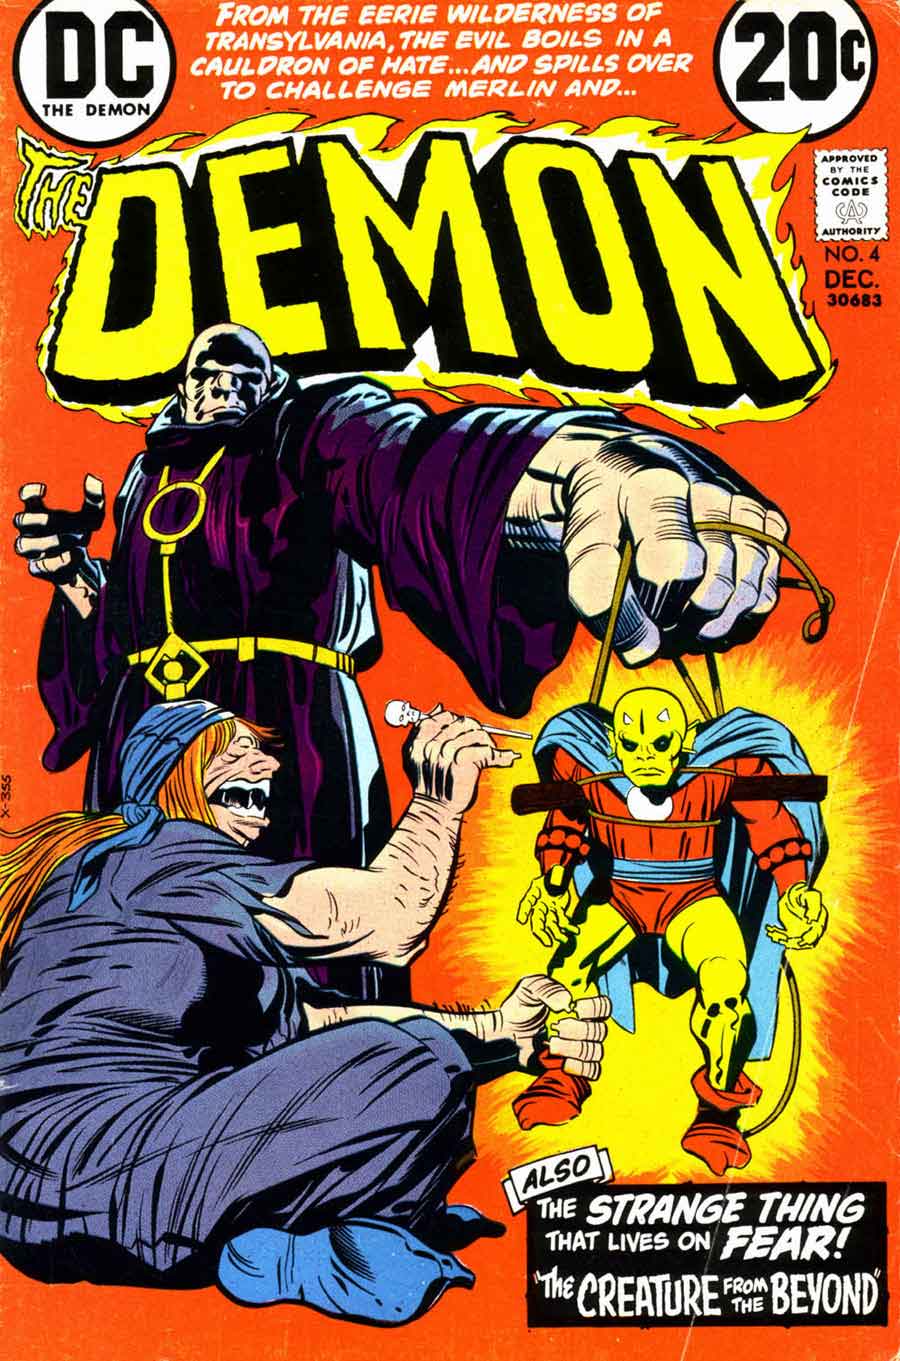 Demon v1 #4 dc bronze age comic book cover art by Jack Kirby